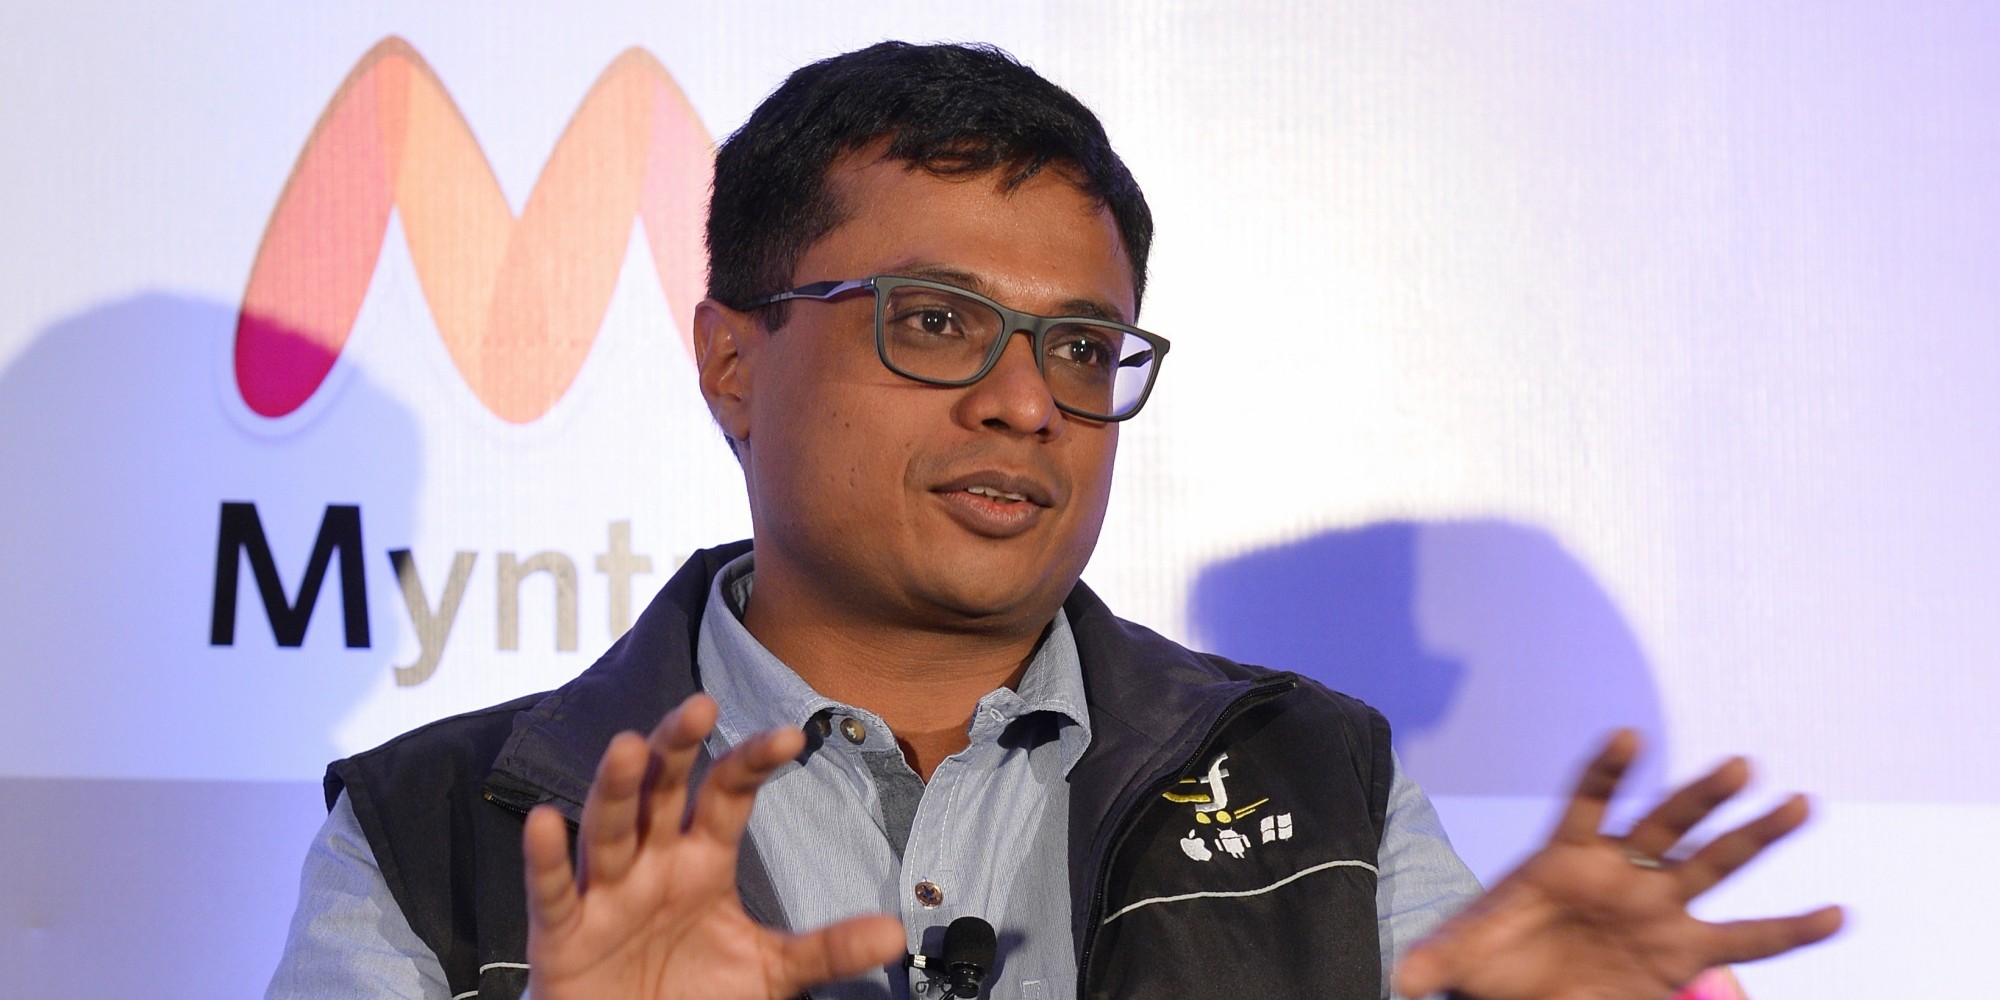 Flipkart Completed Buyback Share Programme Worth $100M, With 3,000 Participants